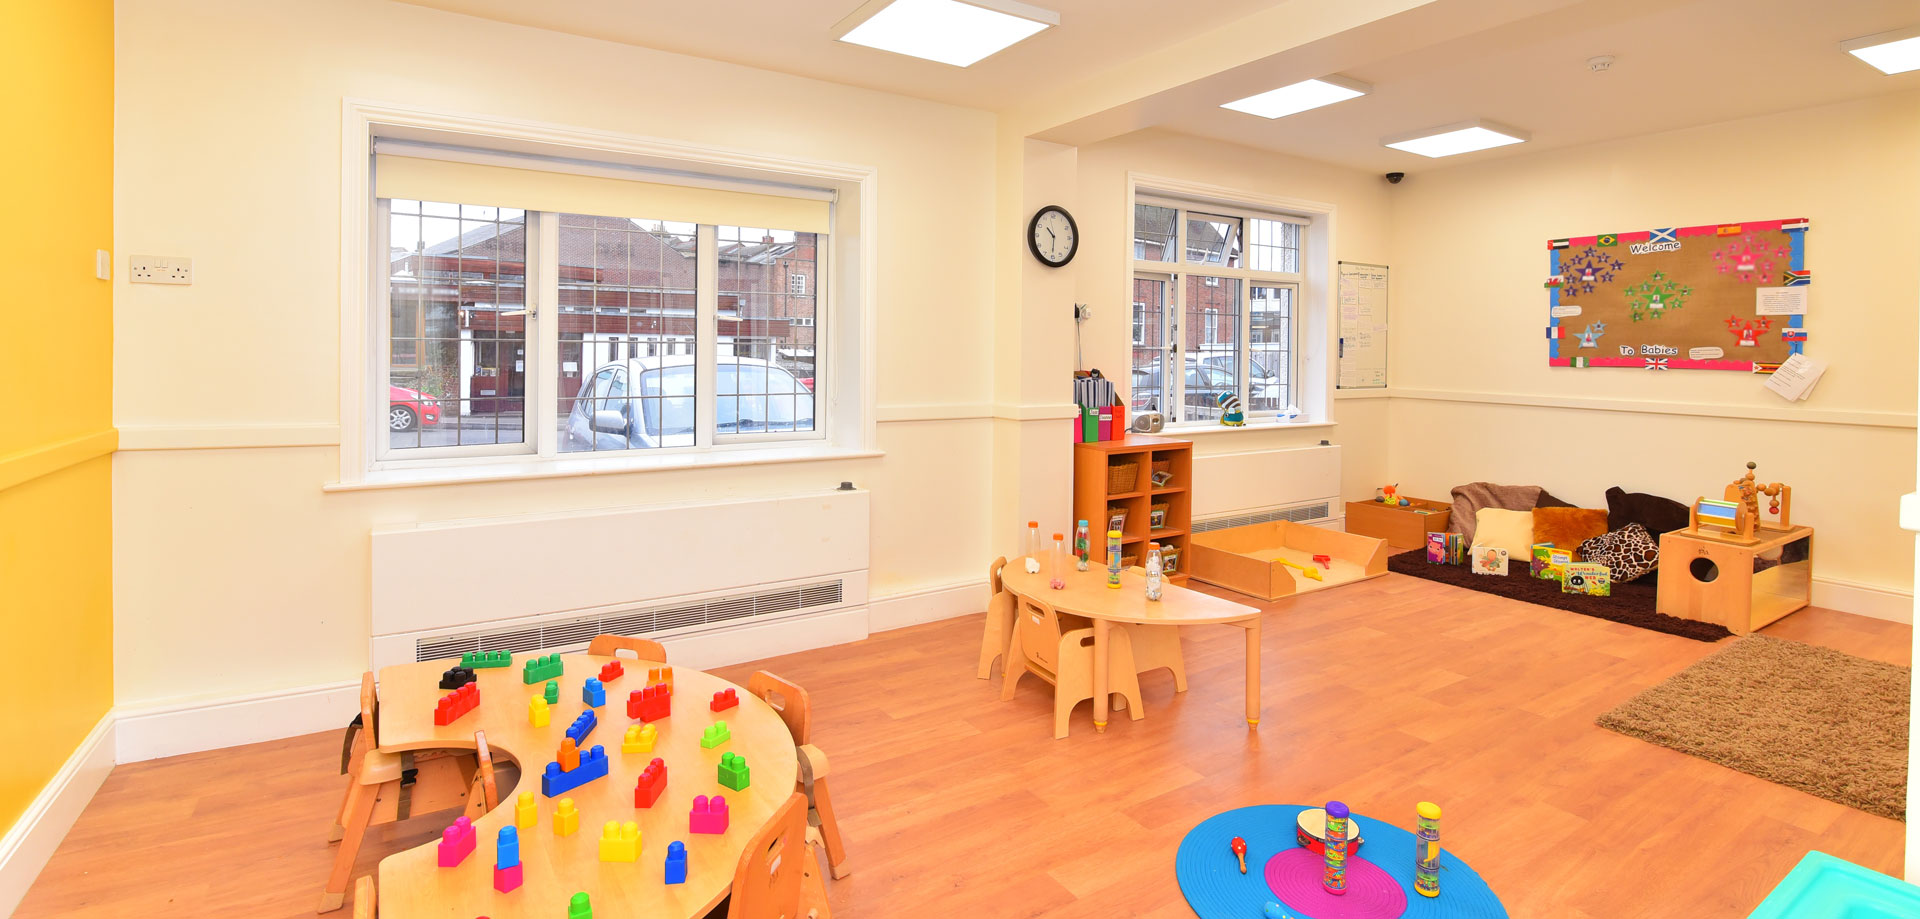 Active Learning Dorking Day Nursery and Preschool